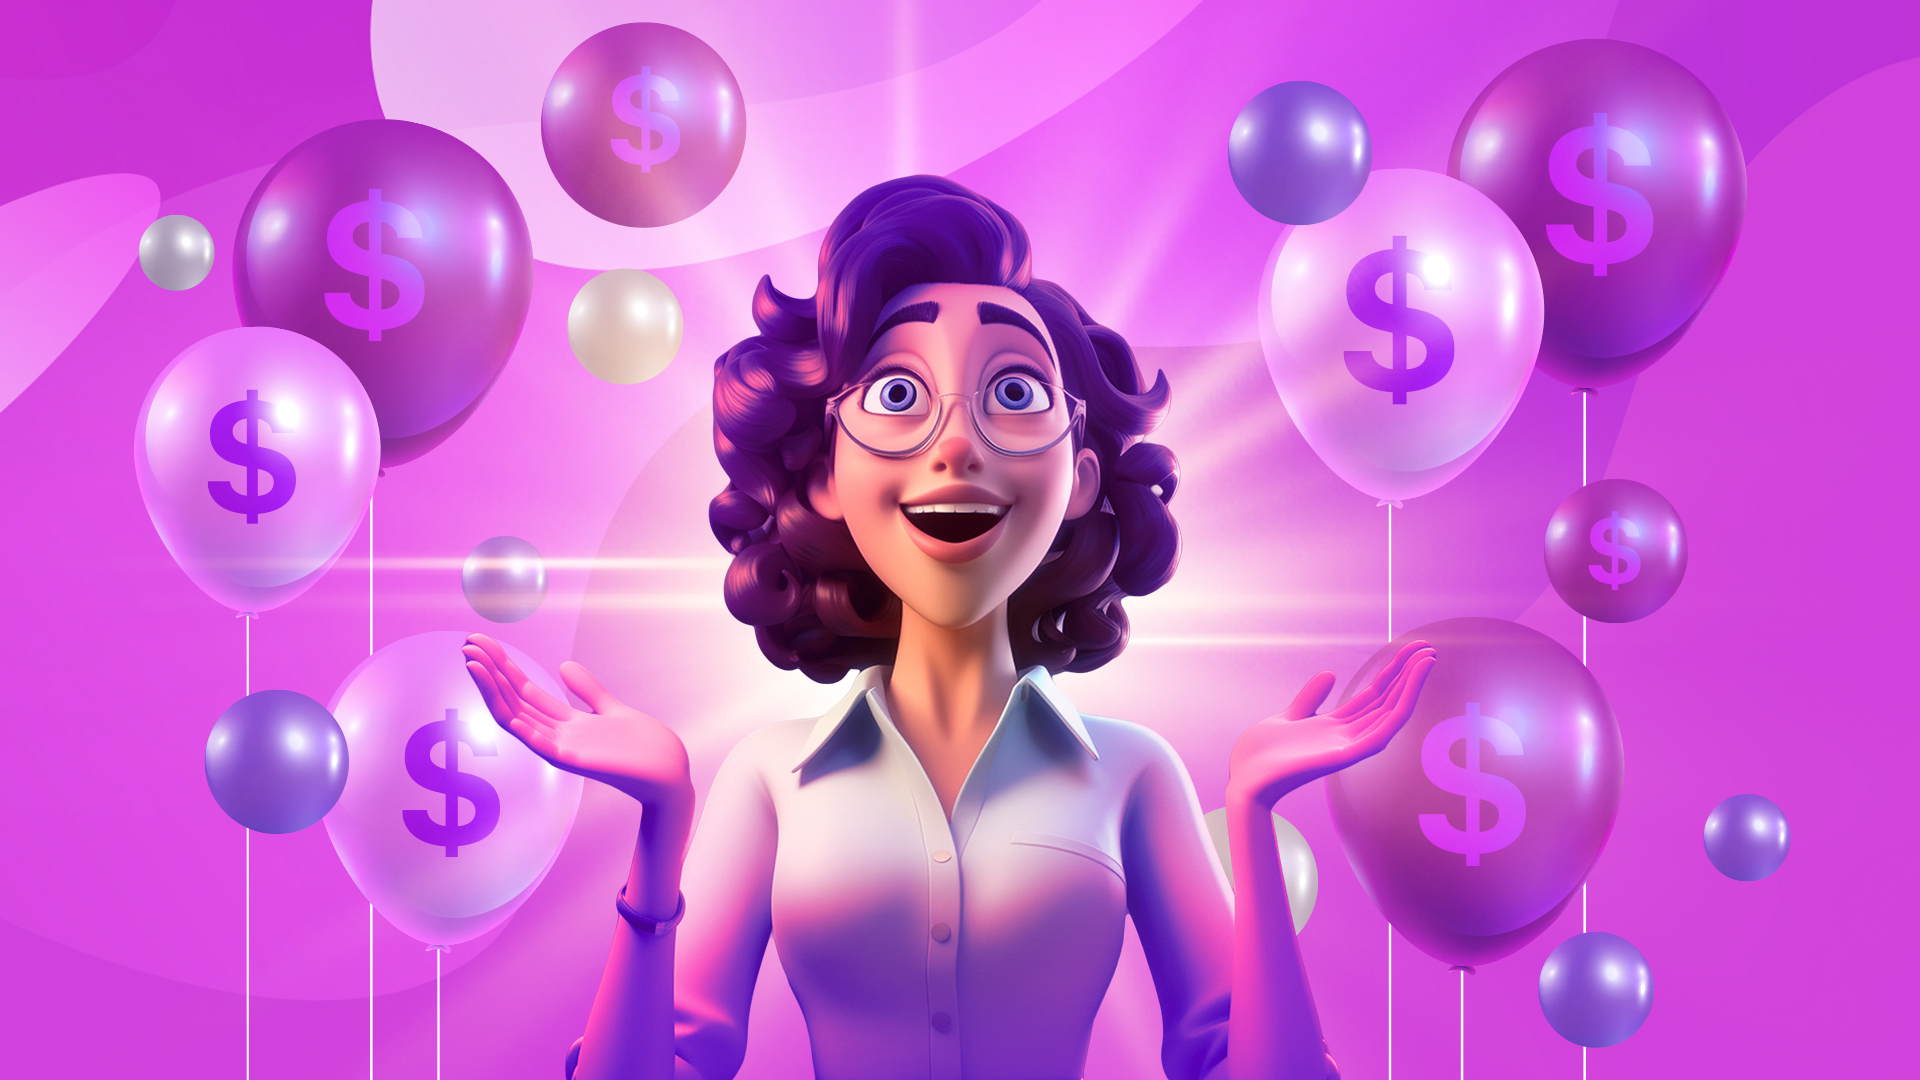 An animated female character with an amazed expression, looking towards the sky. Balloons with dollar signs float behind her.